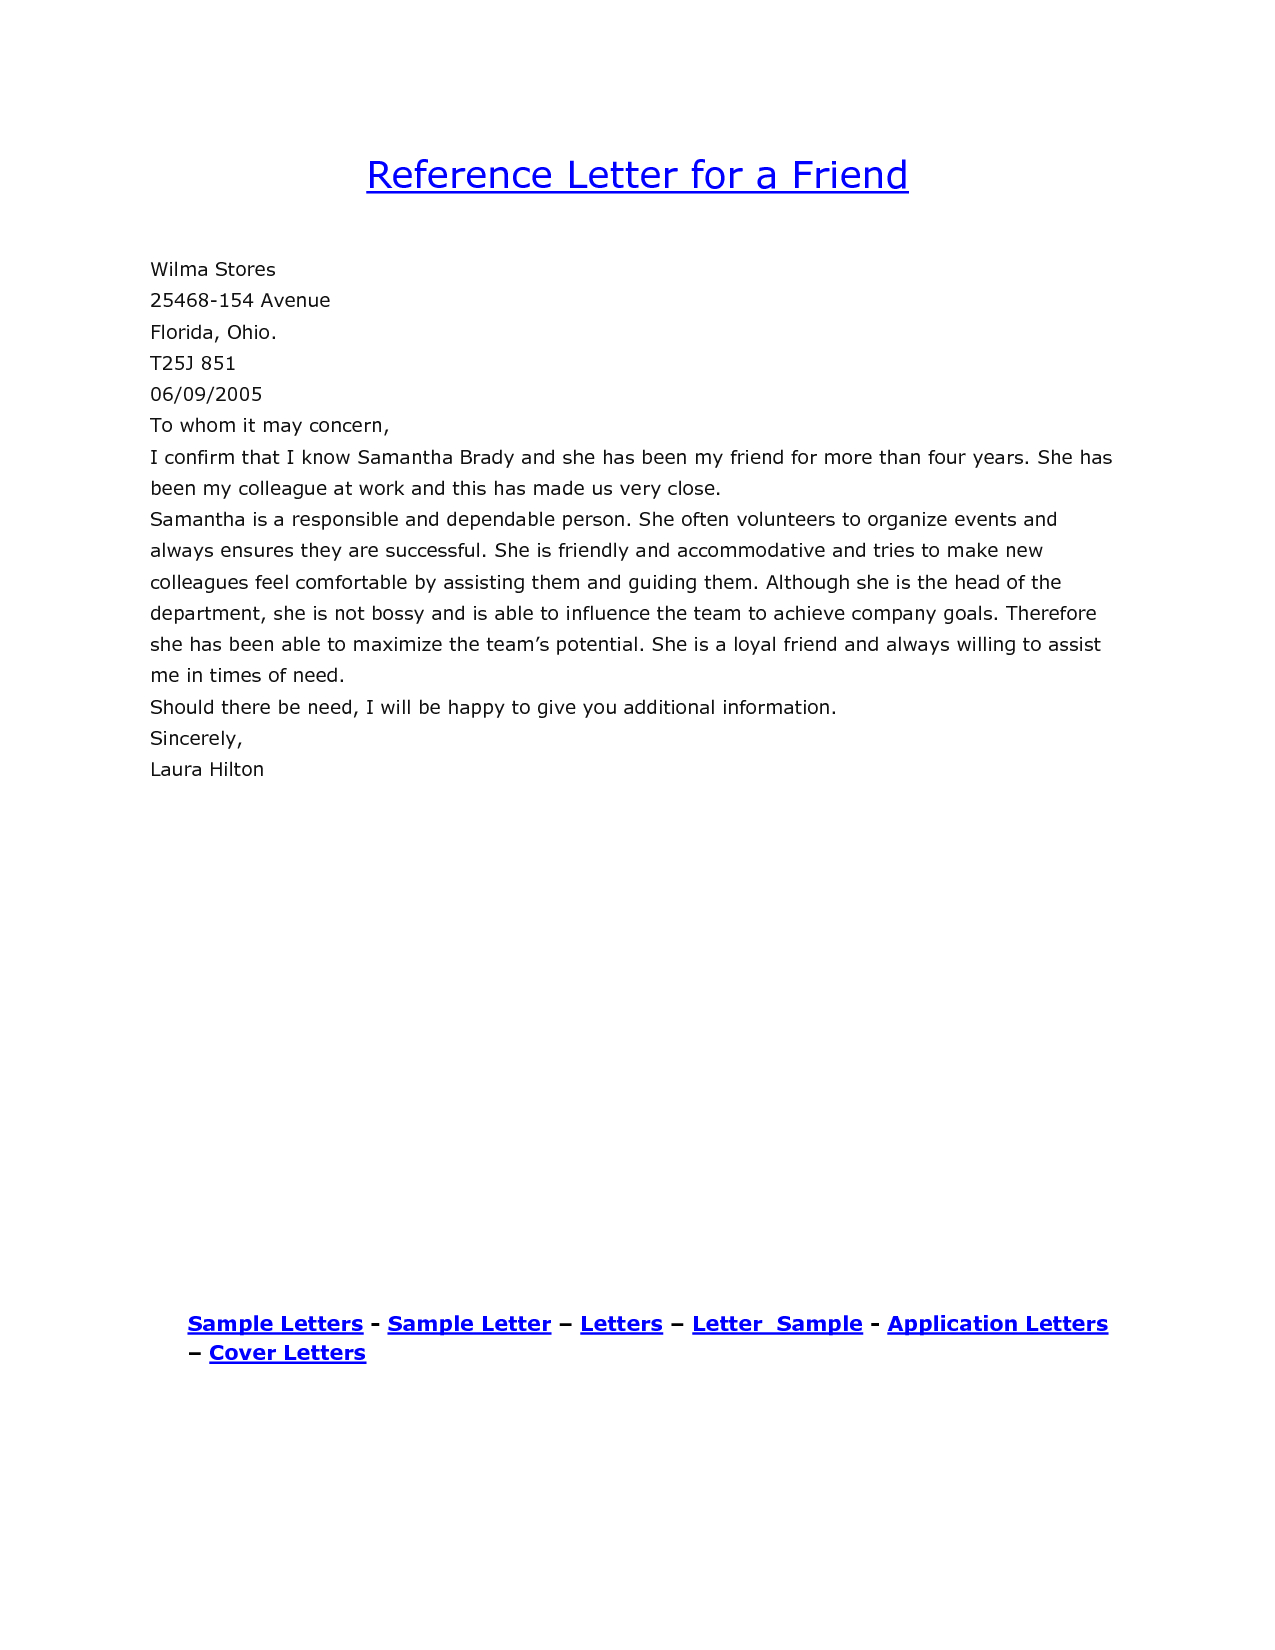 Personal Reference Letter For A Friend Personal Reference within measurements 1275 X 1650